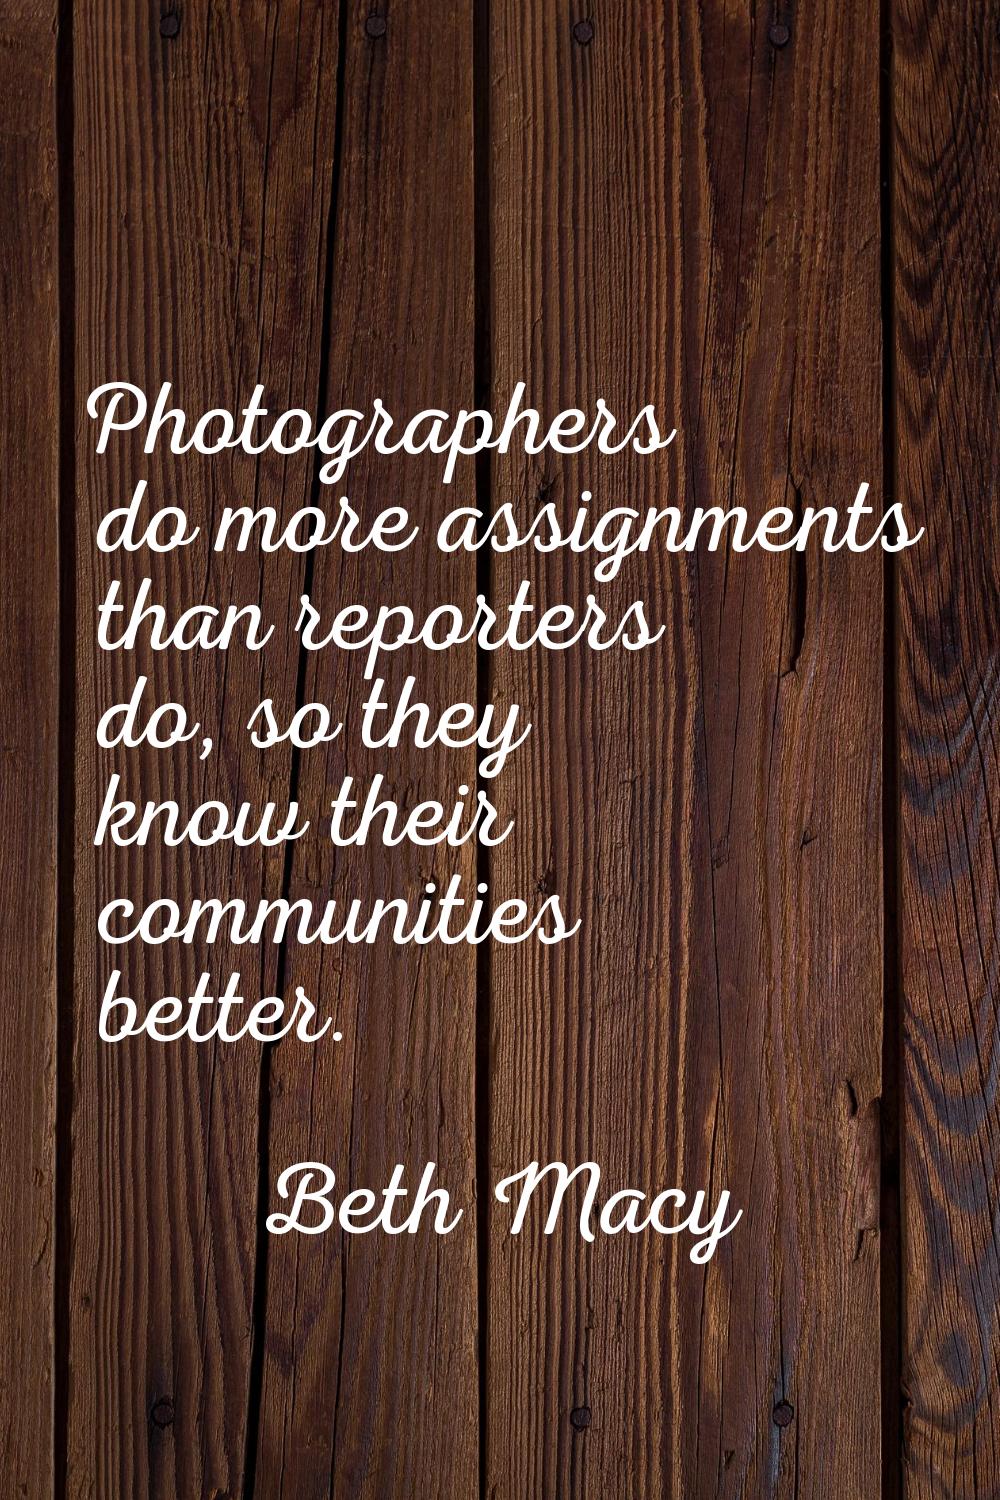 Photographers do more assignments than reporters do, so they know their communities better.